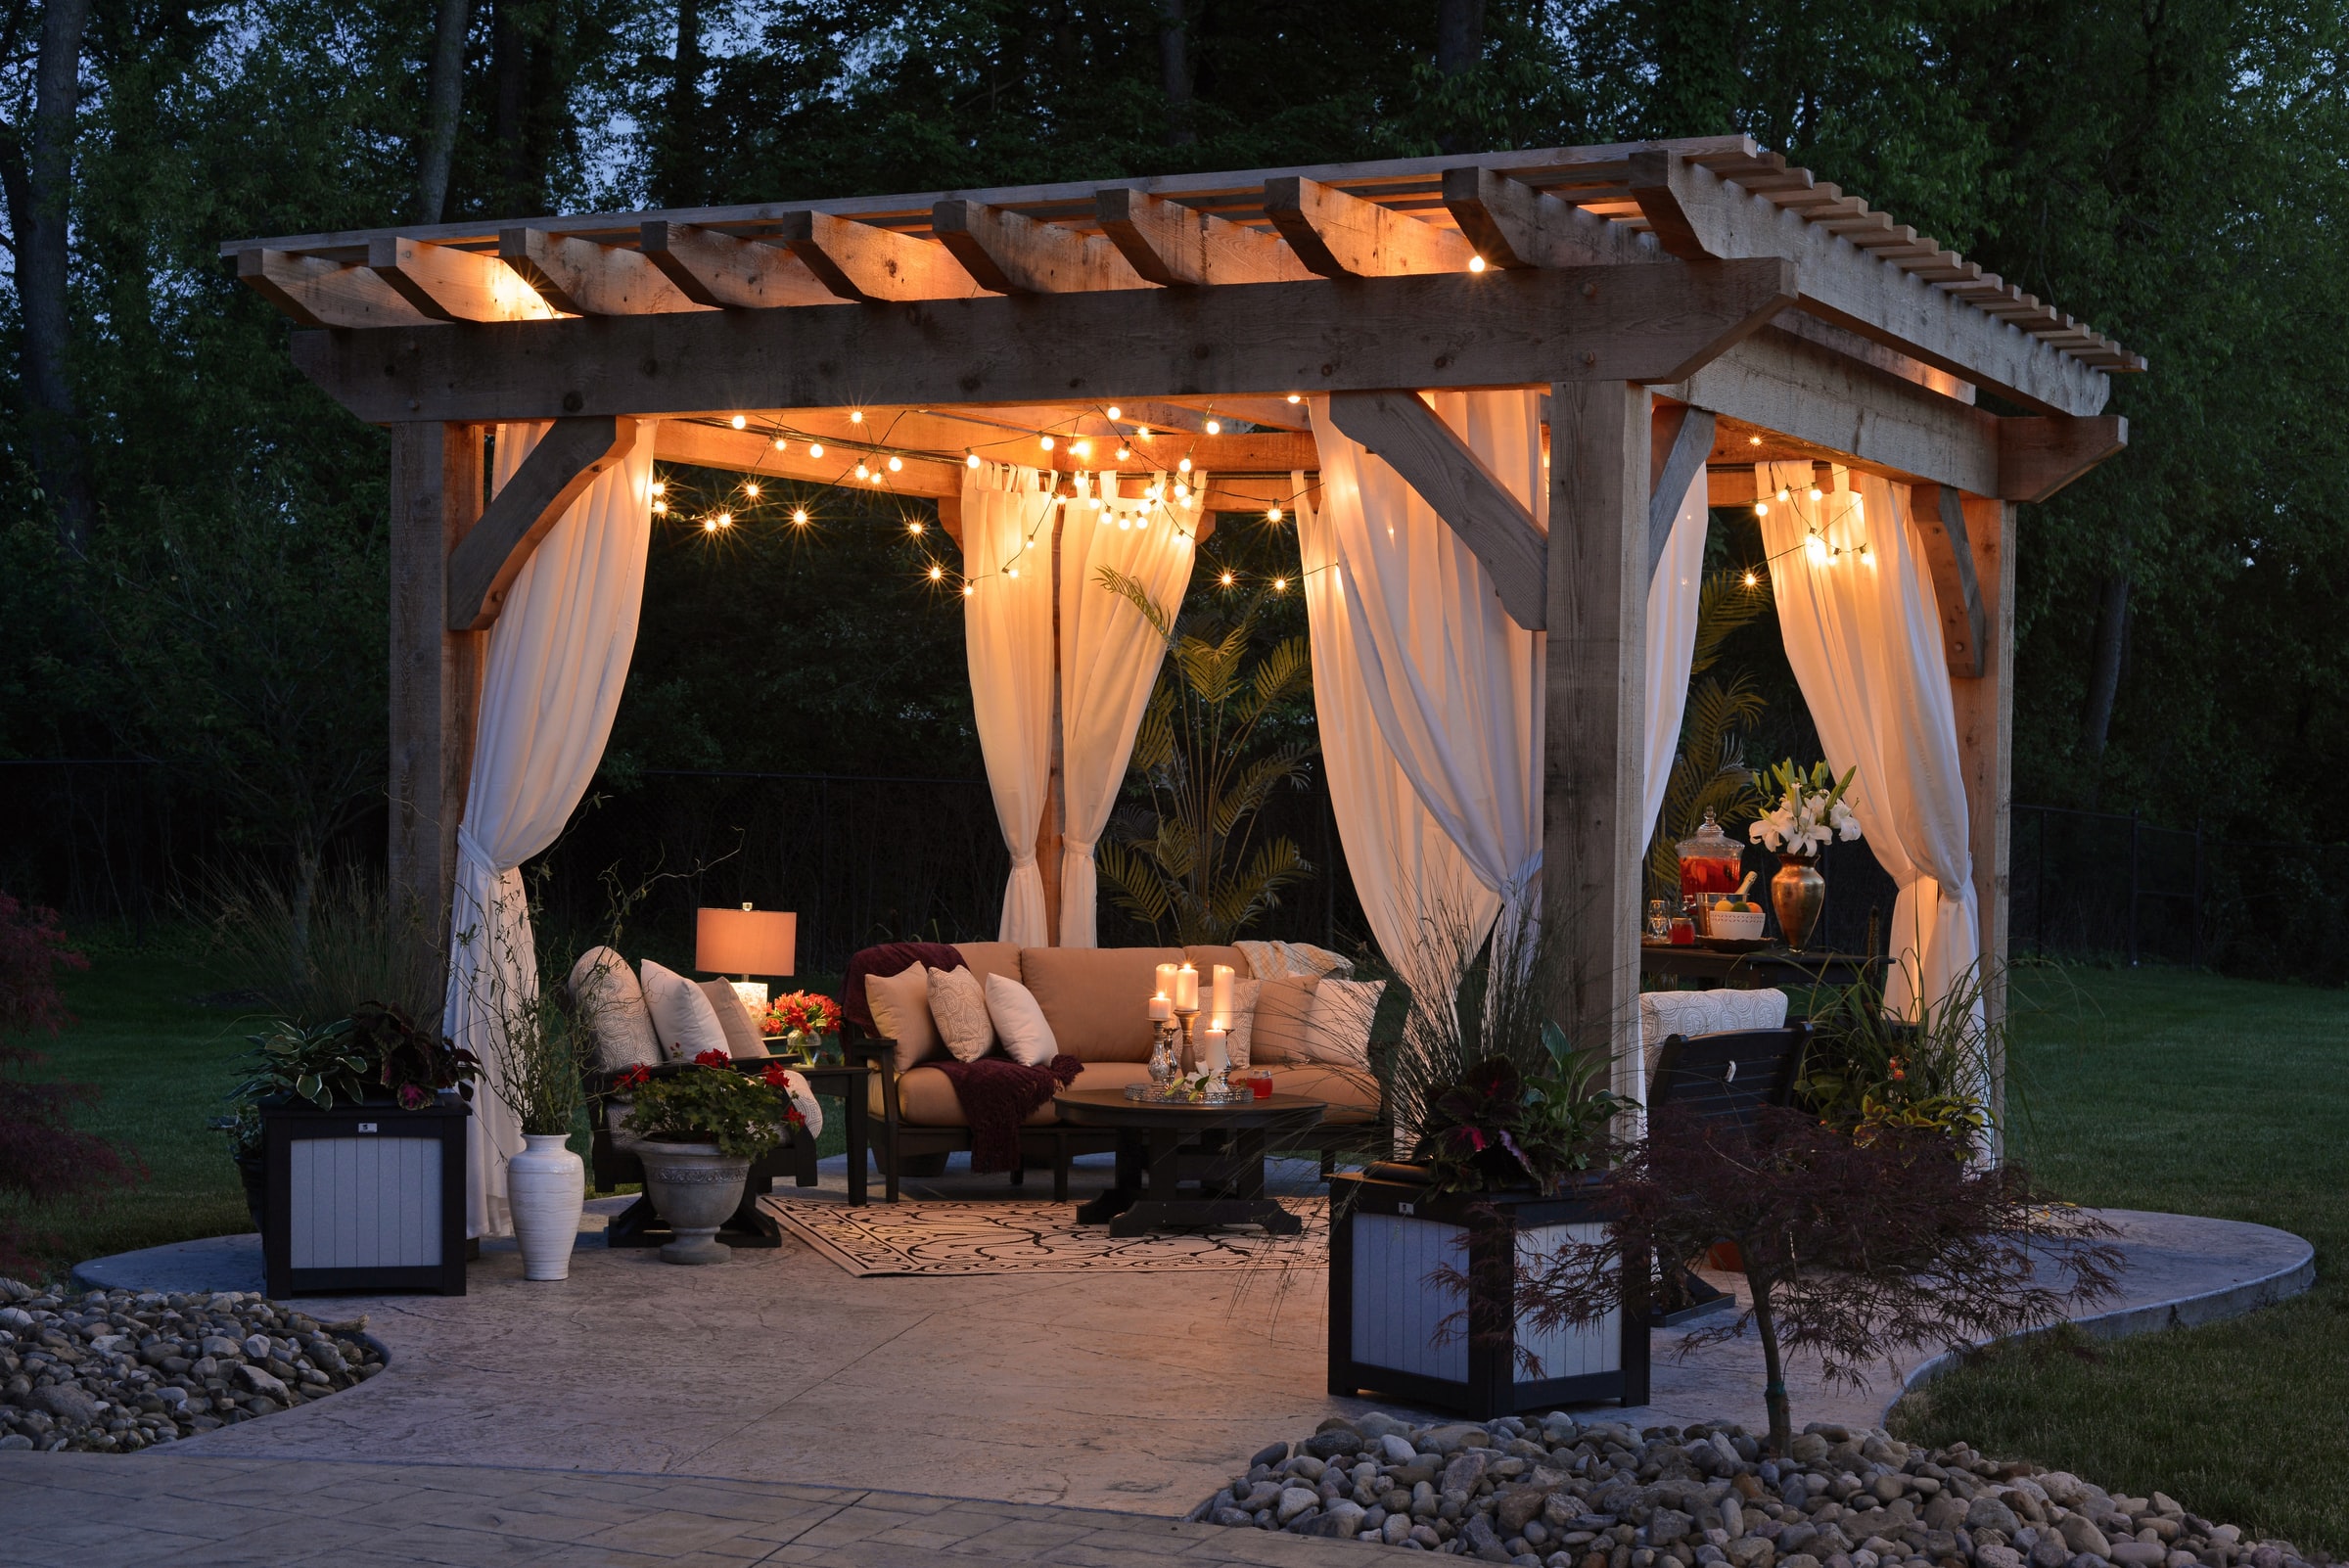 Create an Atmosphere for Outdoor Entertainment